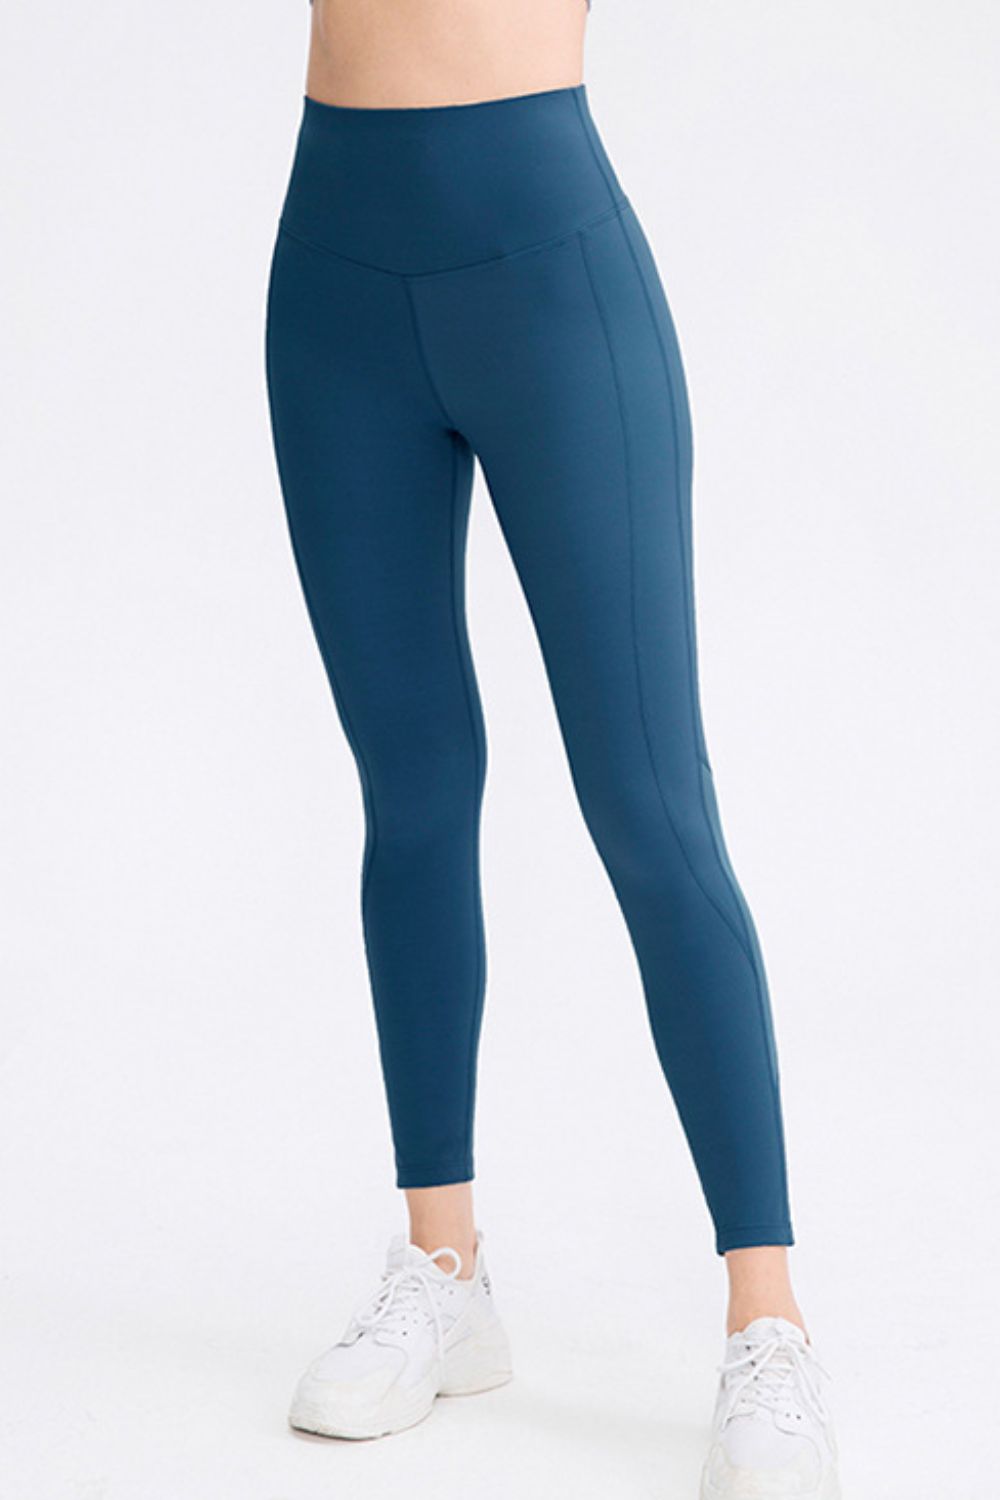 Wide Waistband Slim Fit Long Sports Pants - Leggings - FITGGINS